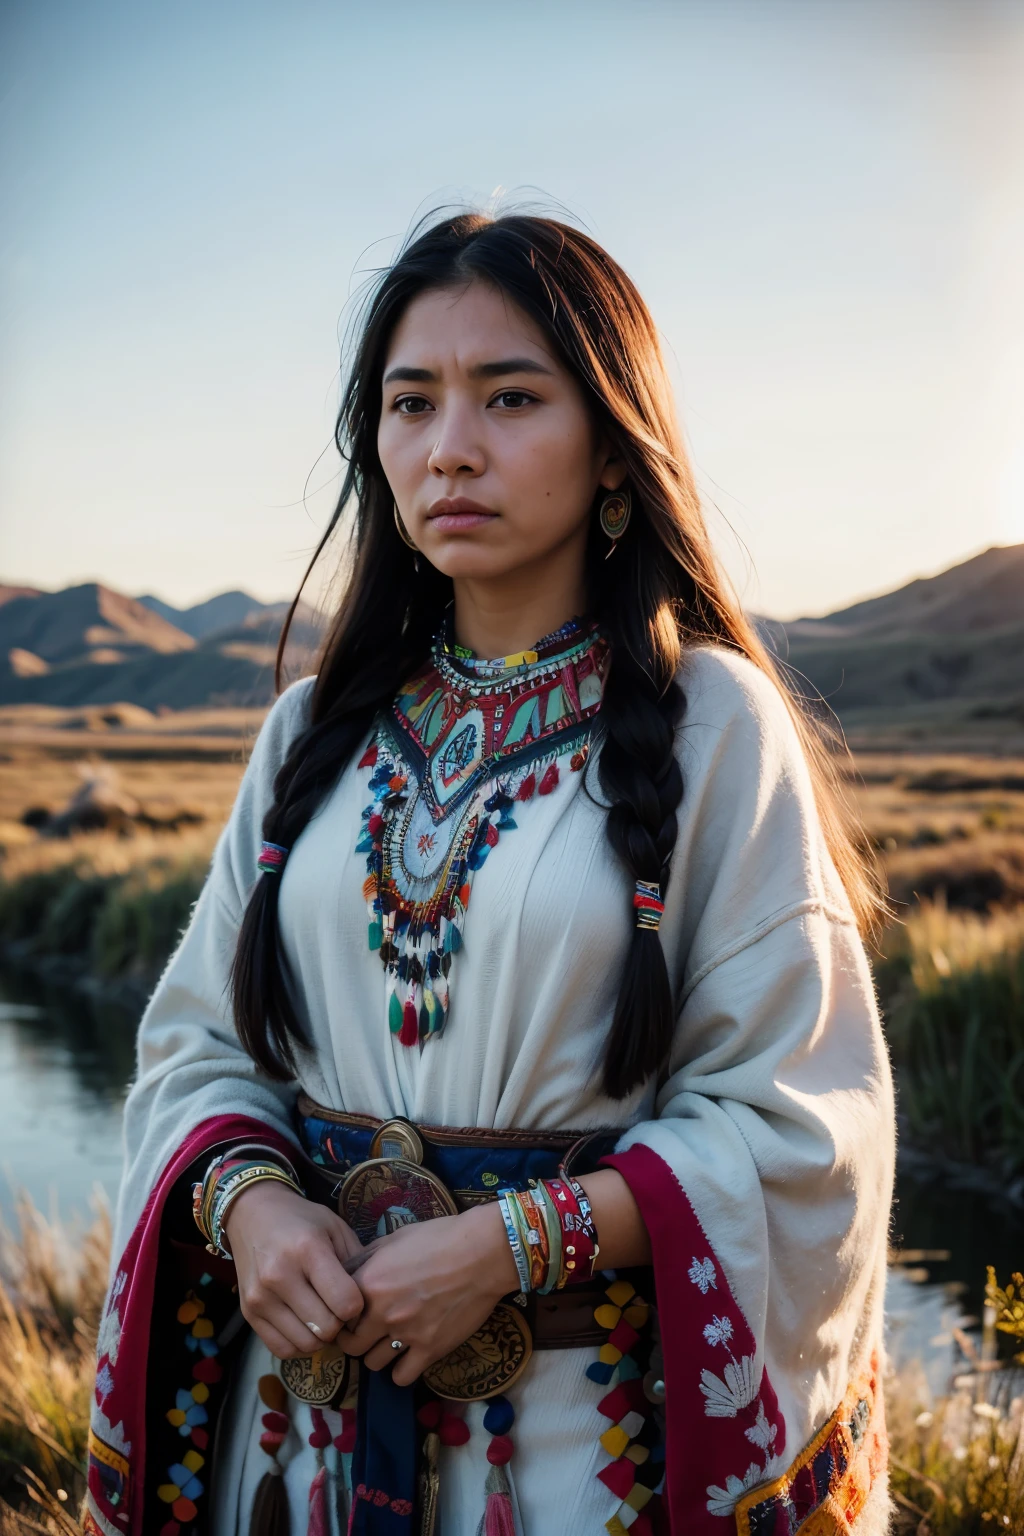 8k, highest quality, Super detailed, Native American women, traditional native american clothing, Intricate beadwork, Feather ornament, Strong and stoic expression, A deep connection to the land